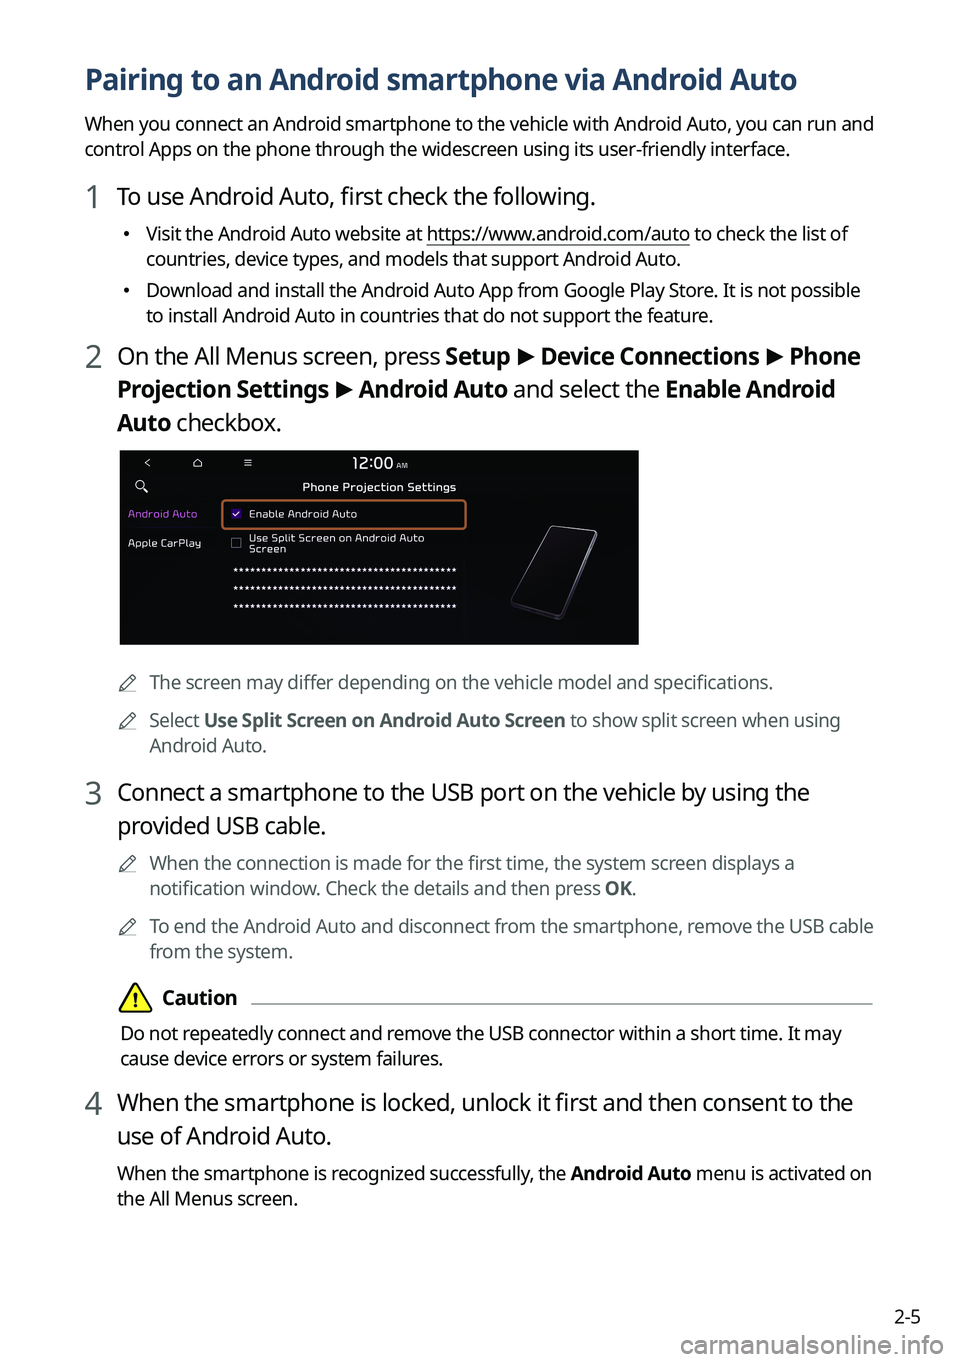 KIA SOUL 2023  Quick Reference Guide 2-5
Pairing to an Android smartphone via Android Auto
When you connect an Android smartphone to the vehicle with Android Auto, you can run and 
control Apps on the phone through the widescreen using i